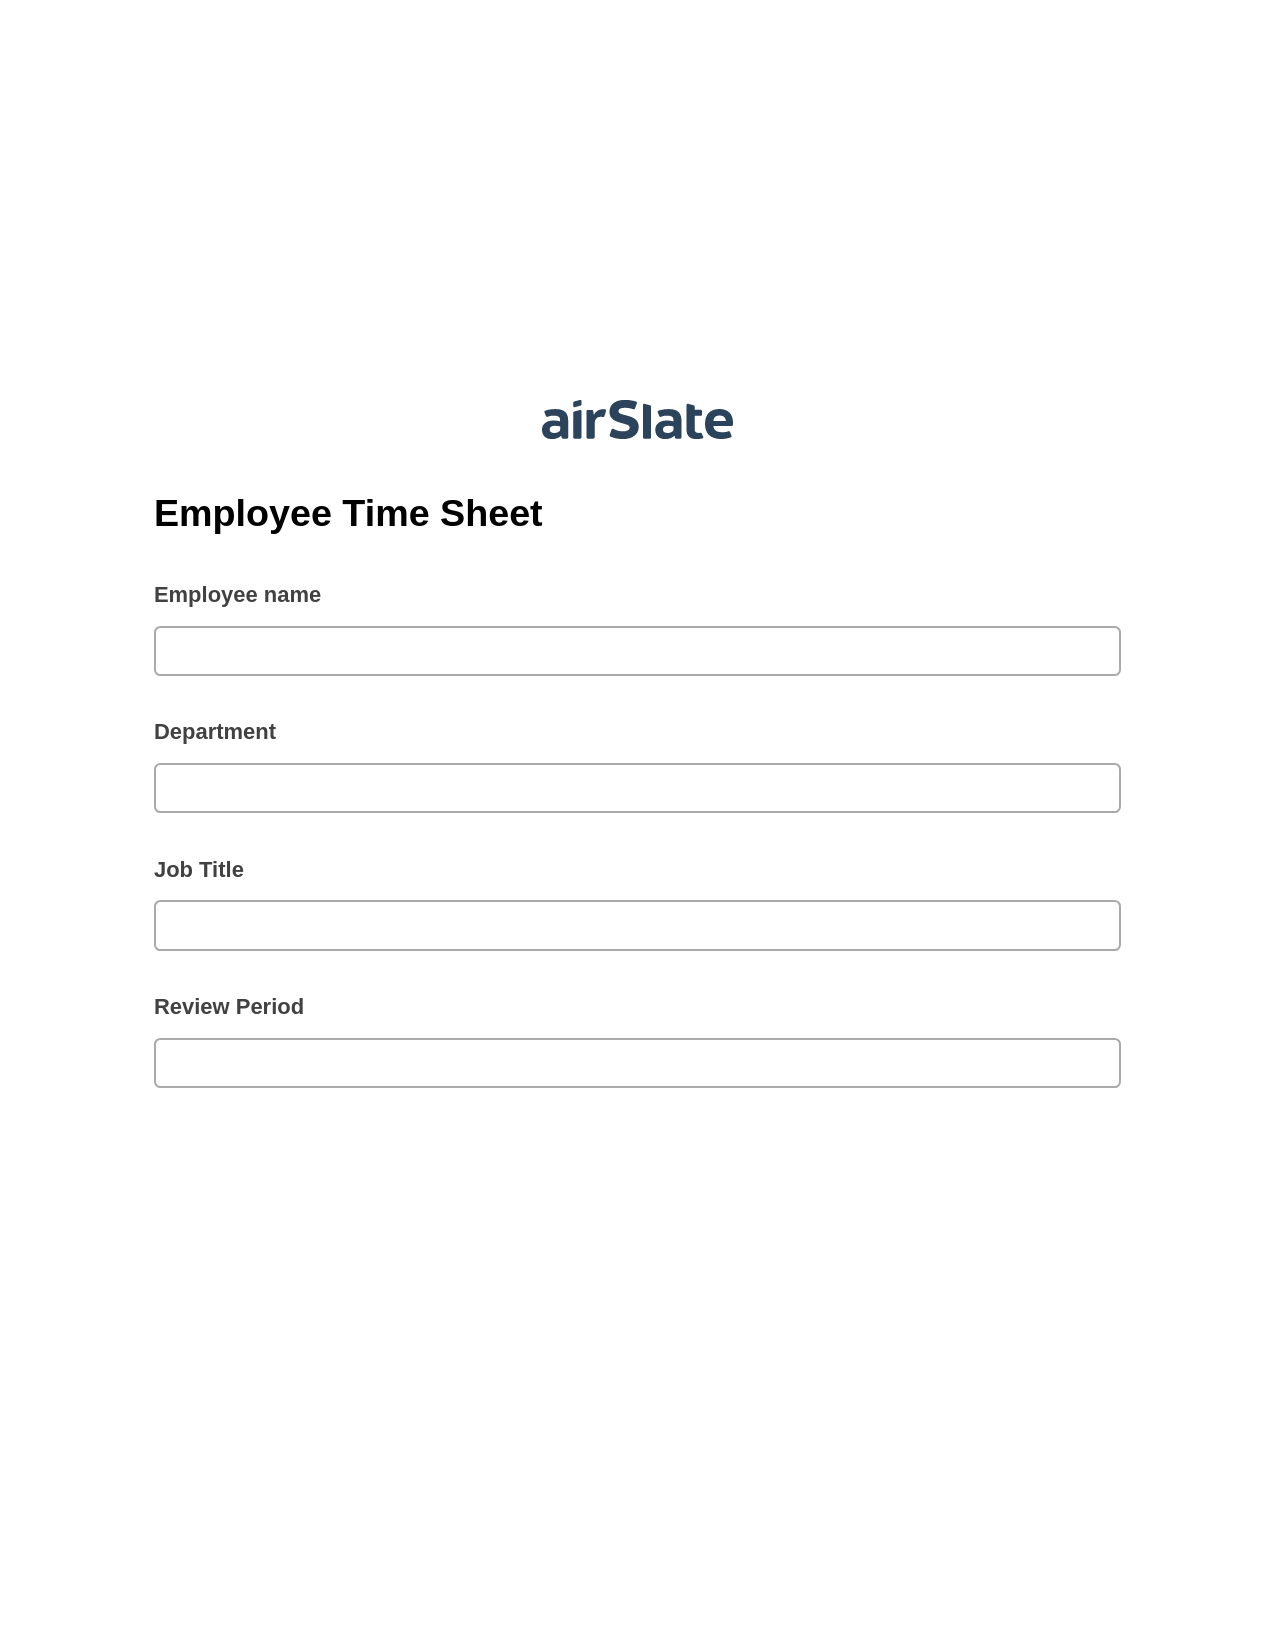 Employee Time Sheet Pre-fill Dropdowns from Airtable, Update Audit Trail Bot, Archive to OneDrive Bot